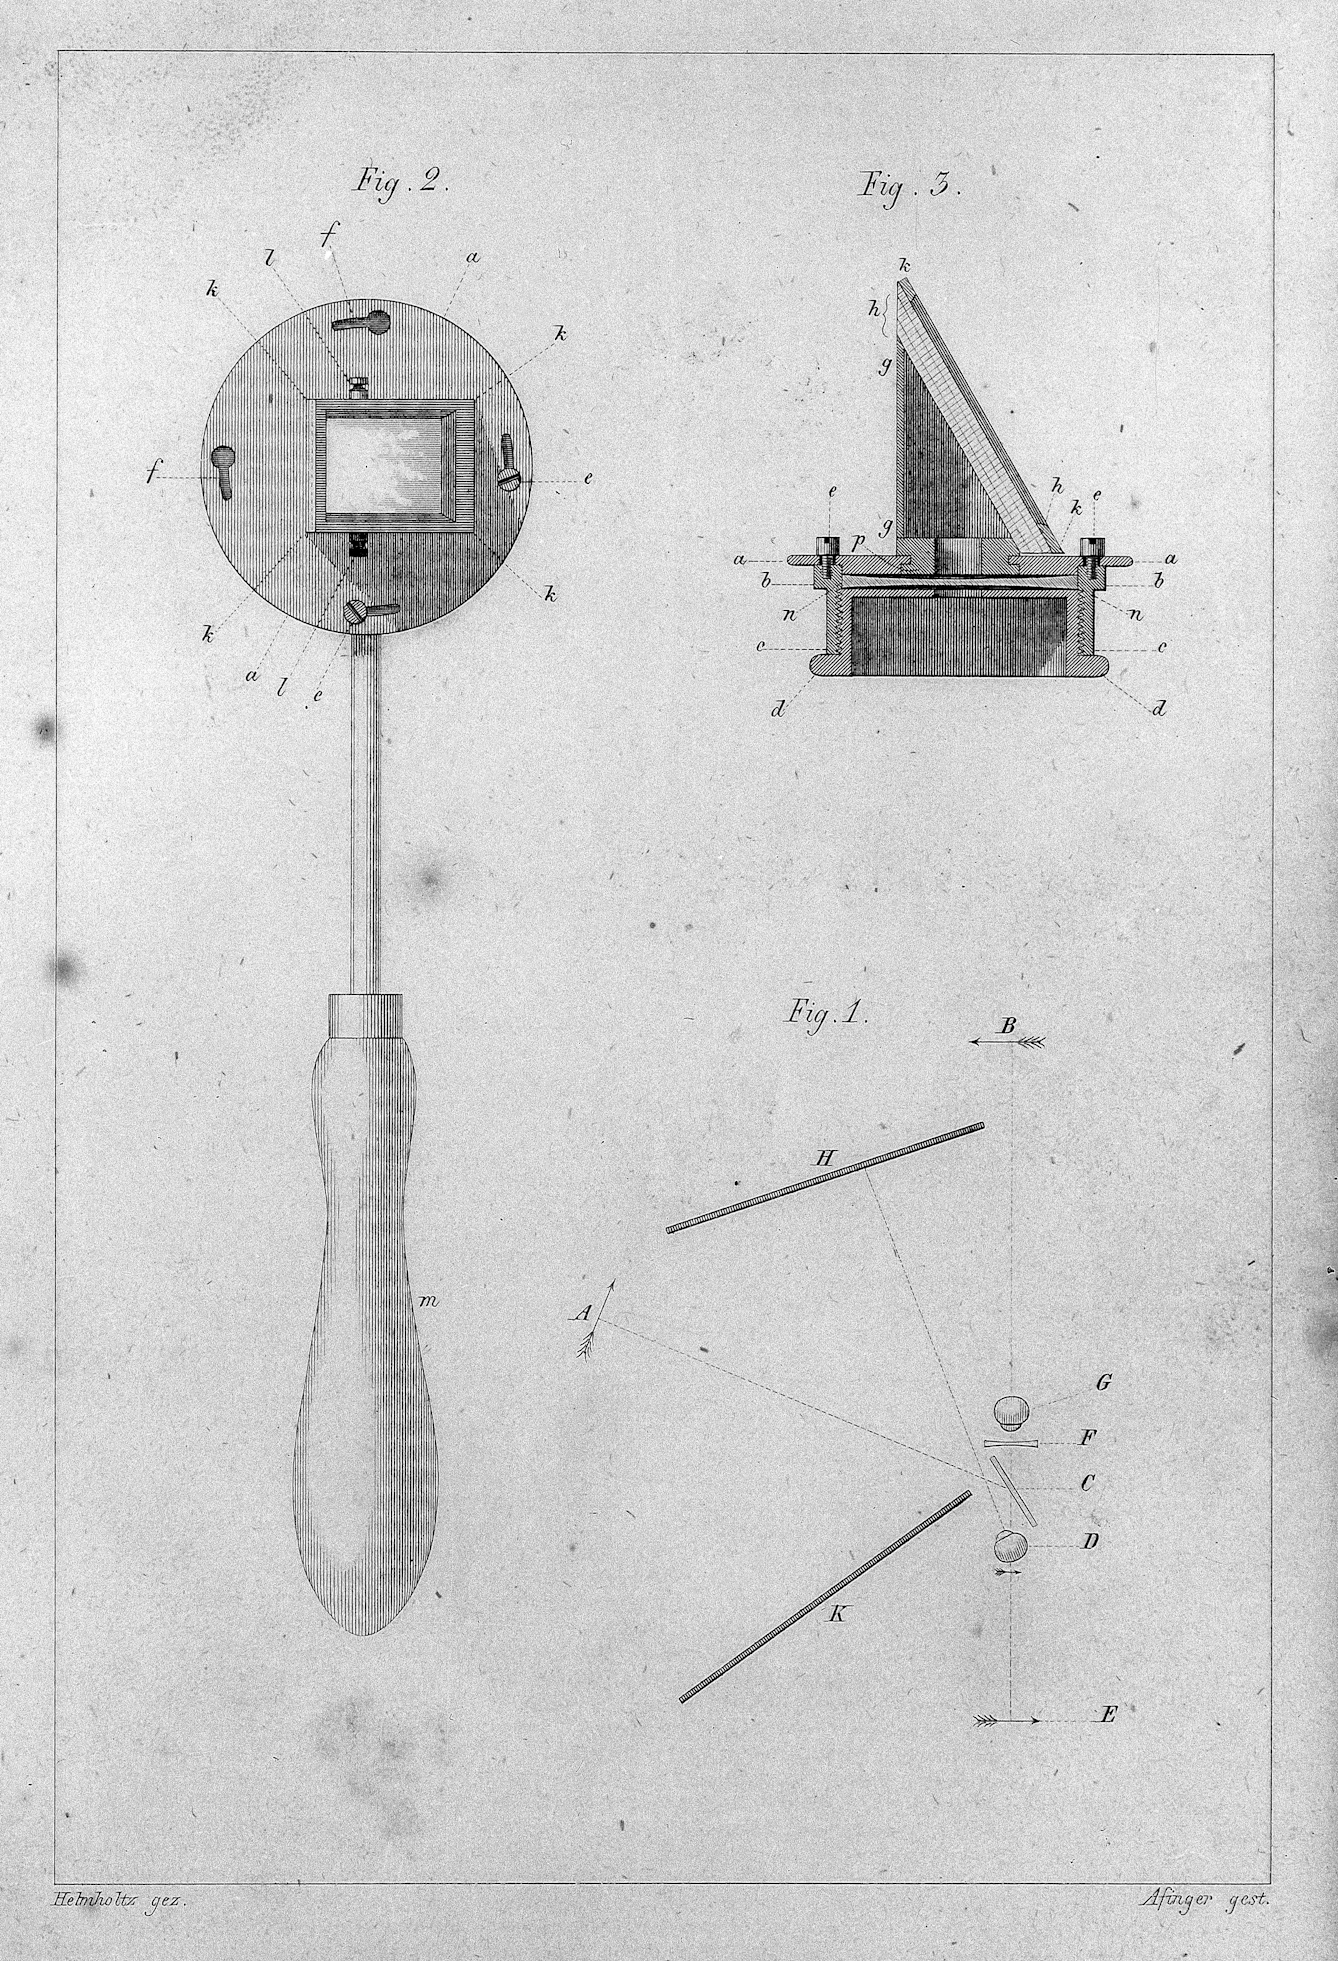 Helmholtz's ophthalmoscope illustration